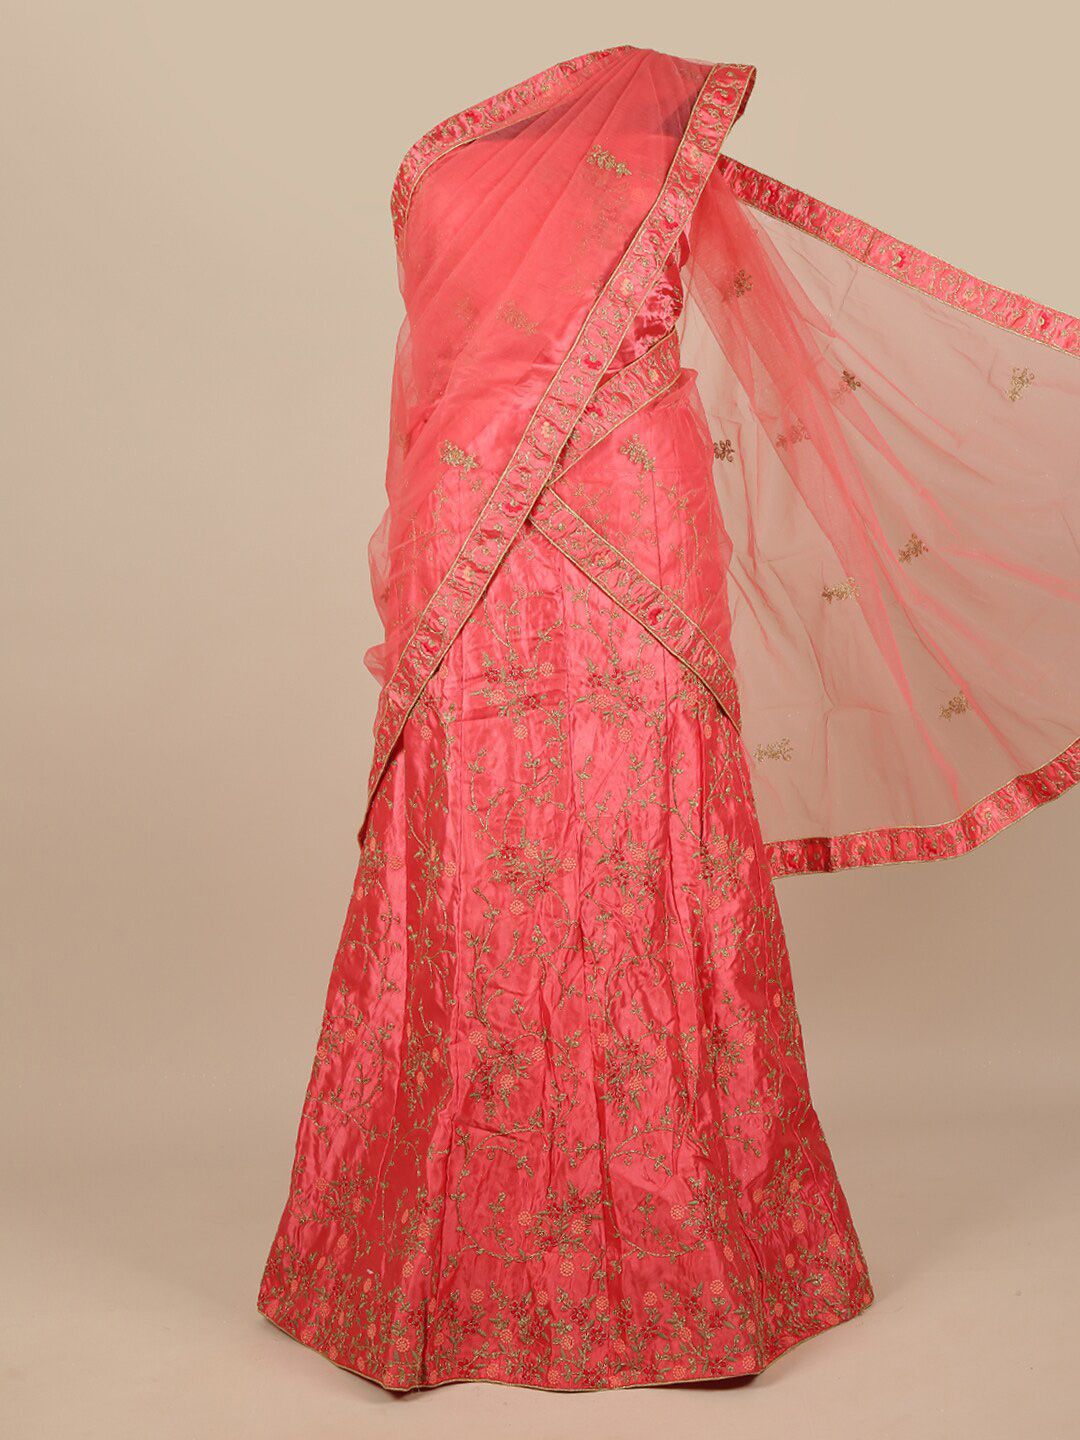 Pothys Pink & Gold-Toned Embroidered Beads and Stones Unstitched Lehenga & Blouse With Dupatta Price in India